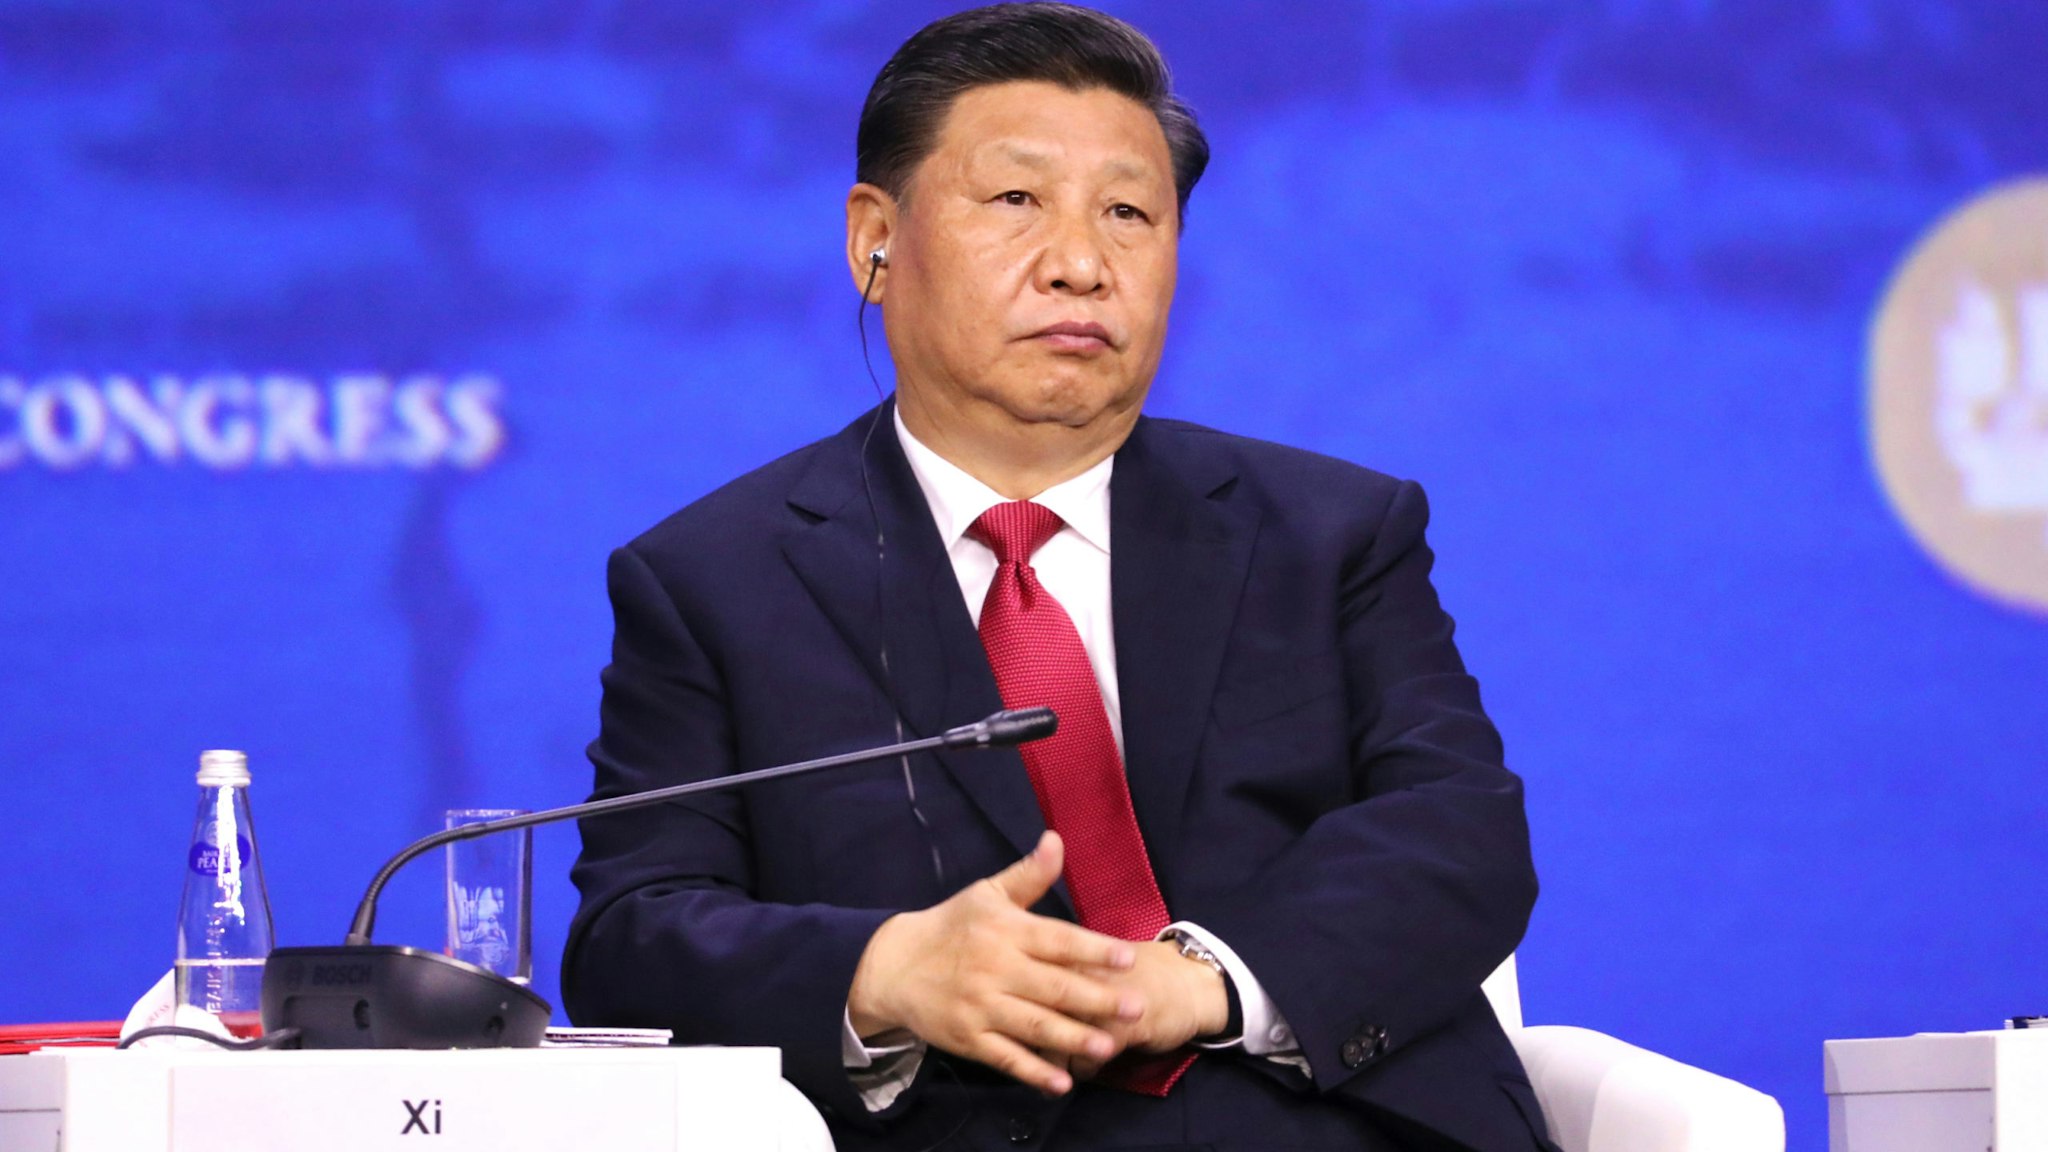 Xi Jinping, China's president, listens to a translation of a speech through an earpiece during the plenary session at the St. Petersburg International Economic Forum (SPIEF) in St. Petersburg, Russia, on Friday, June 7, 2019. Over the last 21 years, the Forum has become a leading global platform for members of the business community to meet and discuss the key economic issues facing Russia, emerging markets, and the world as a whole.